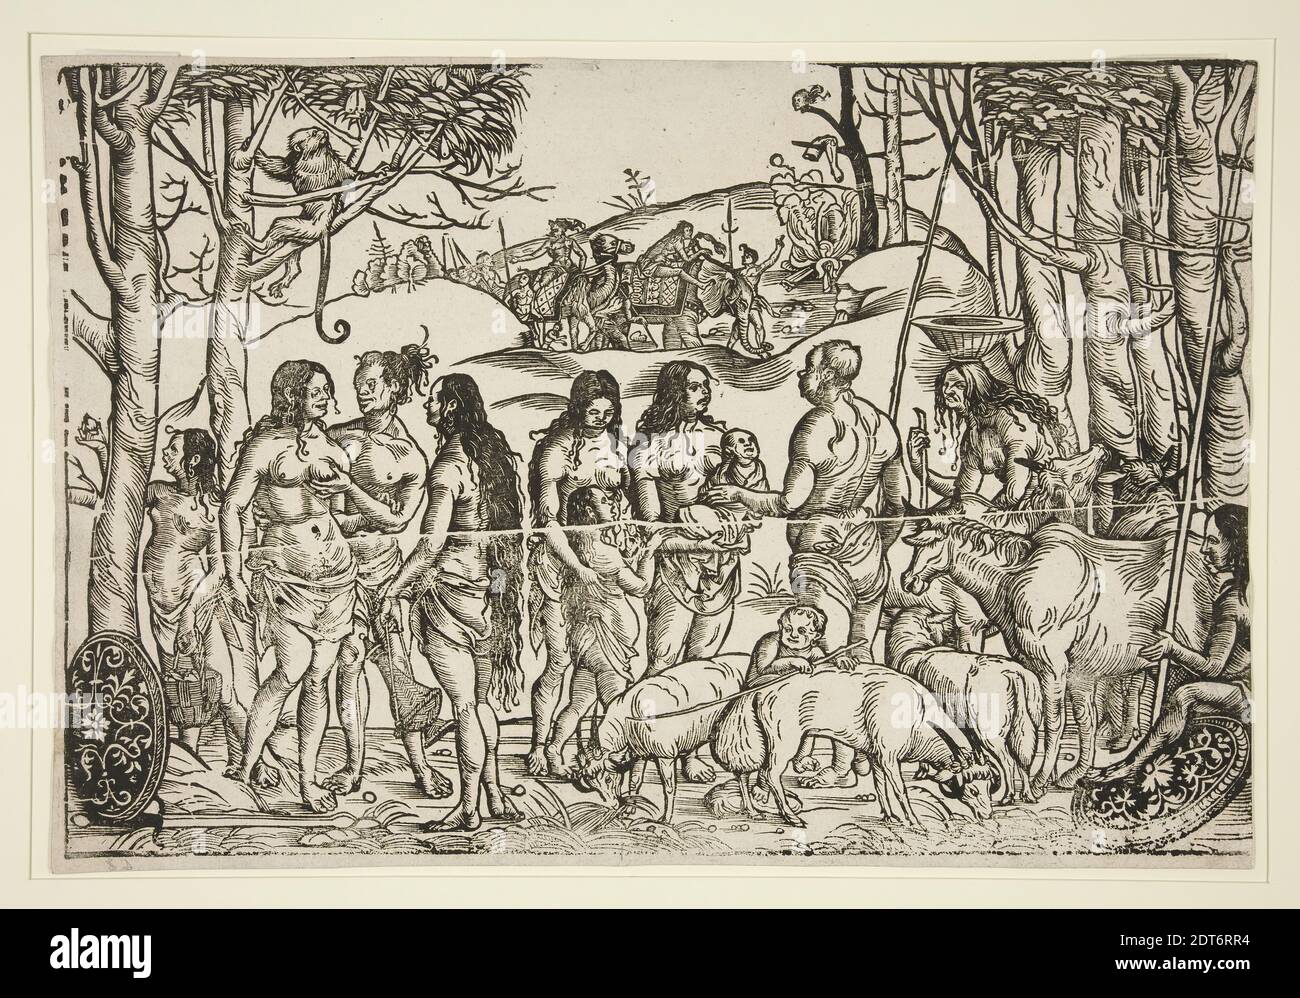 Artist, copy after: Hans Burgkmair the Elder, German, 1473–1531, Hottentots with herd, 16th century, Woodcut, block: 26.5 cm (10 7/16 in.), Made in Germany, German, 16th century, Works on Paper - Prints Stock Photo